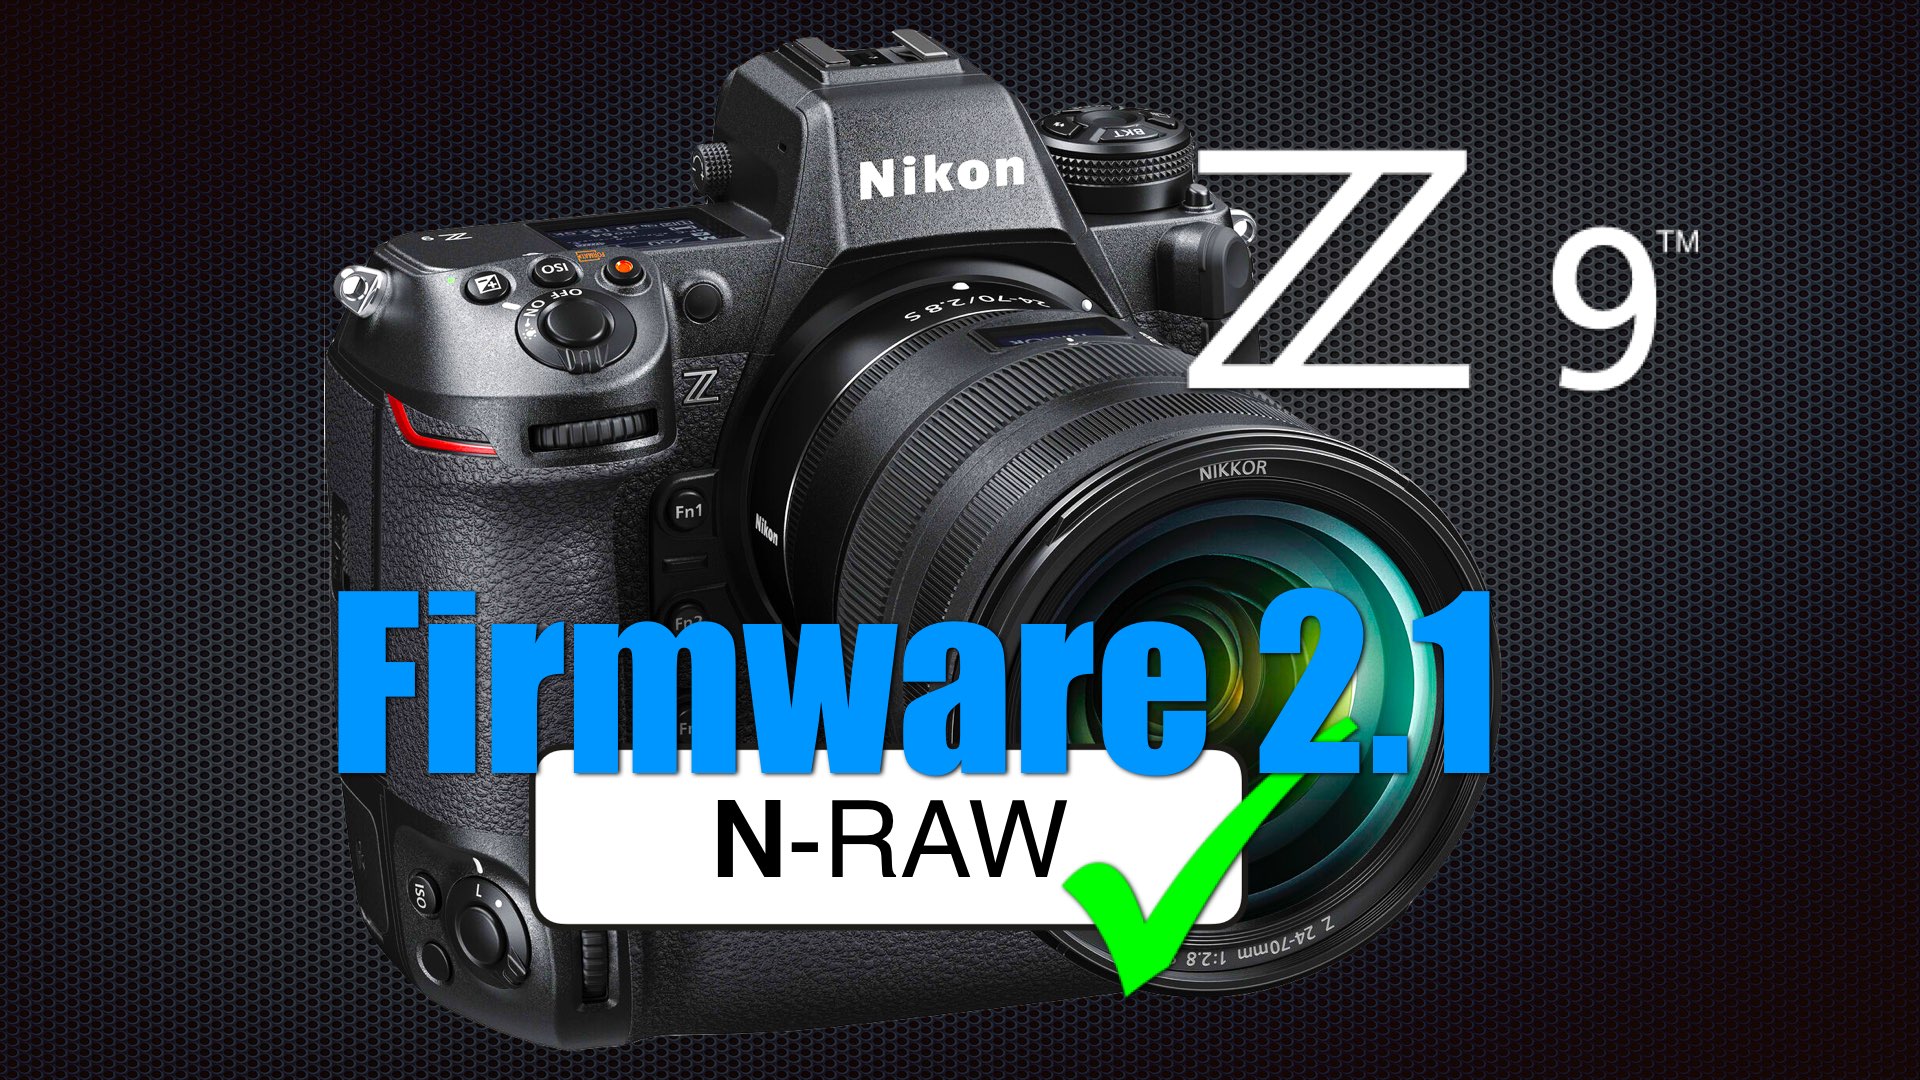 Nikon Z9 Firmware 2.1 Announced: N-RAW Stays (for now)